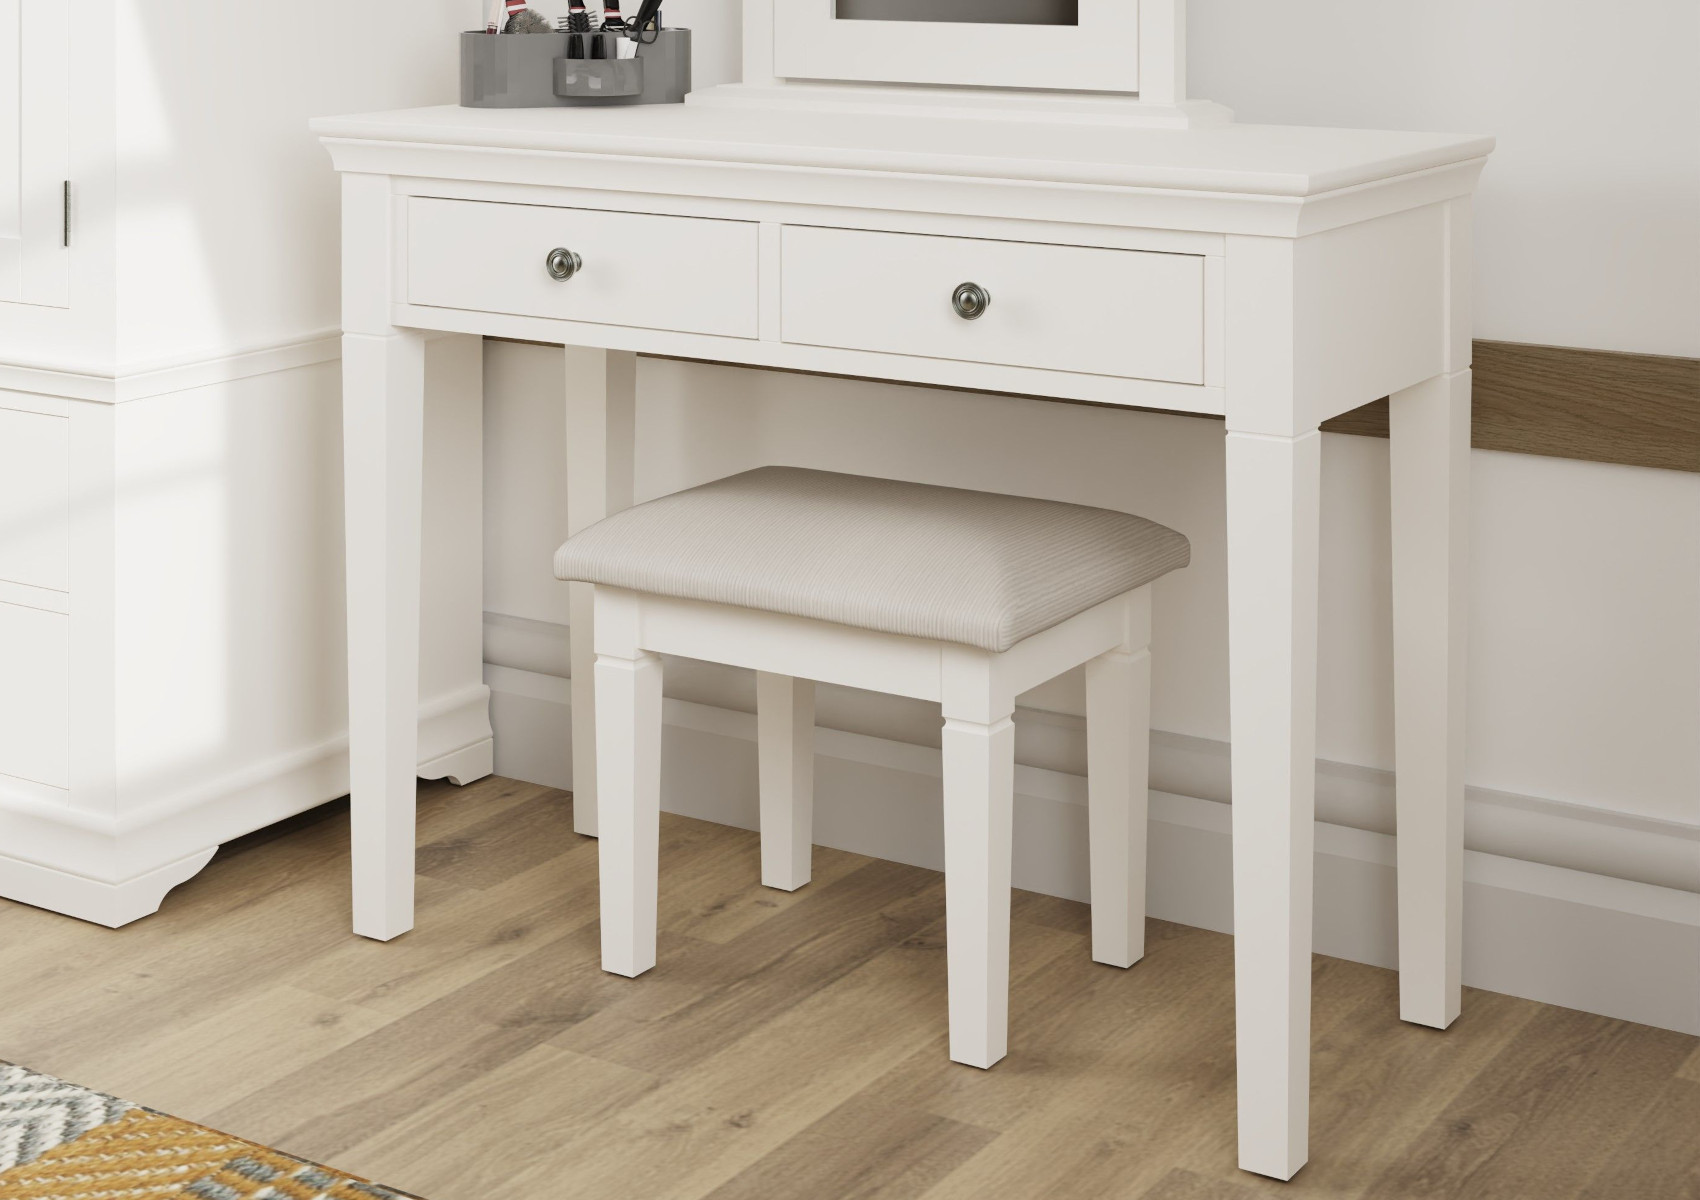 View Anna White Dressing Table Time4Sleep information